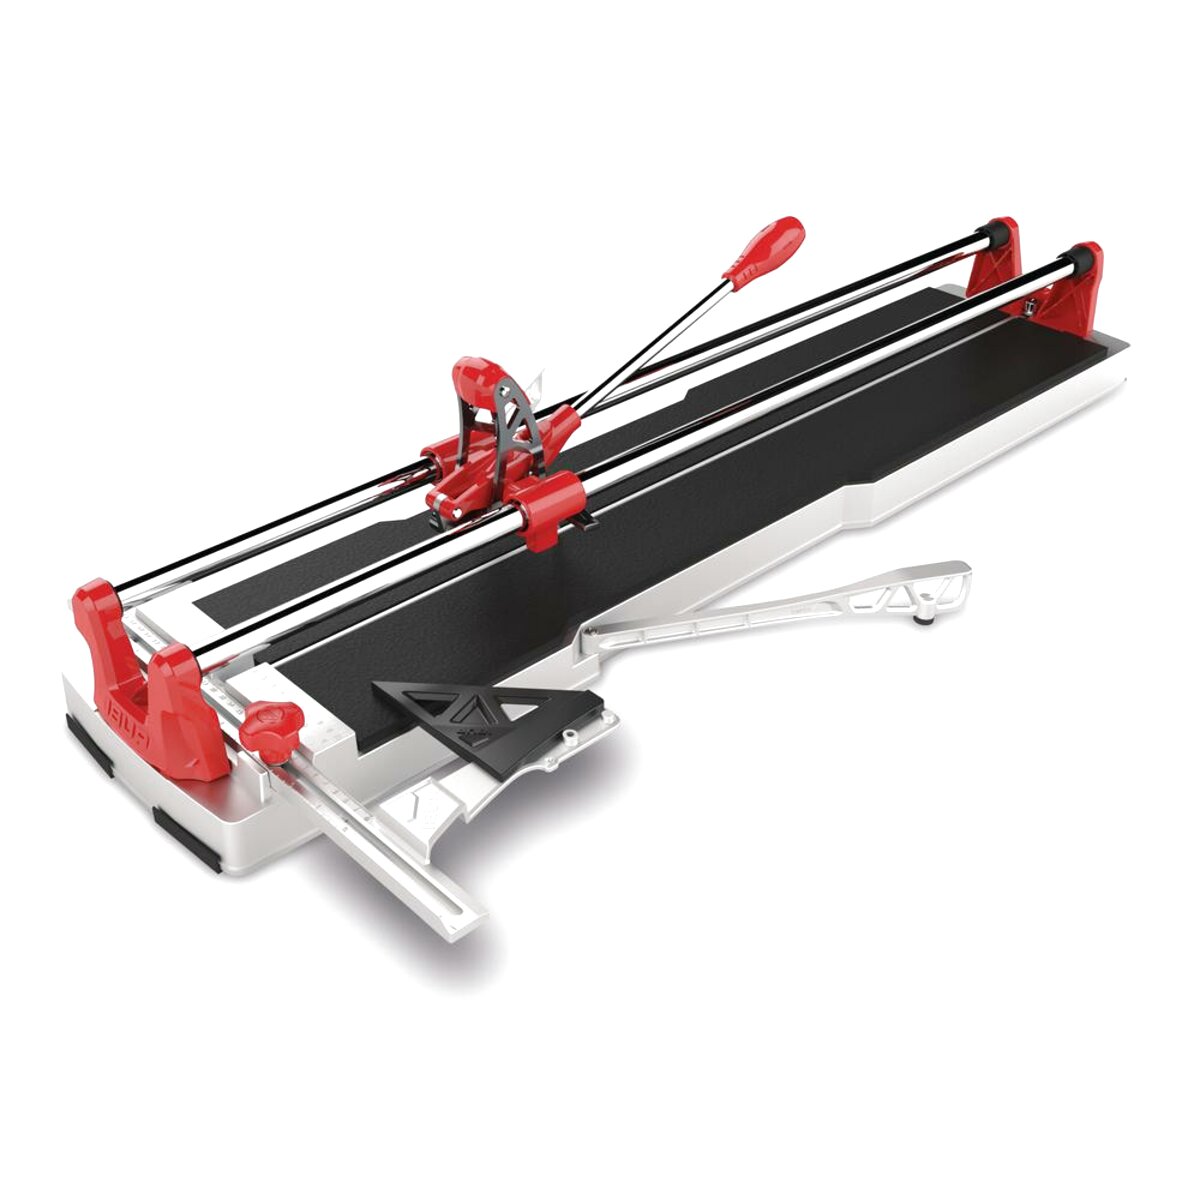 Rubi Tile Cutters for sale in UK | 81 used Rubi Tile Cutters